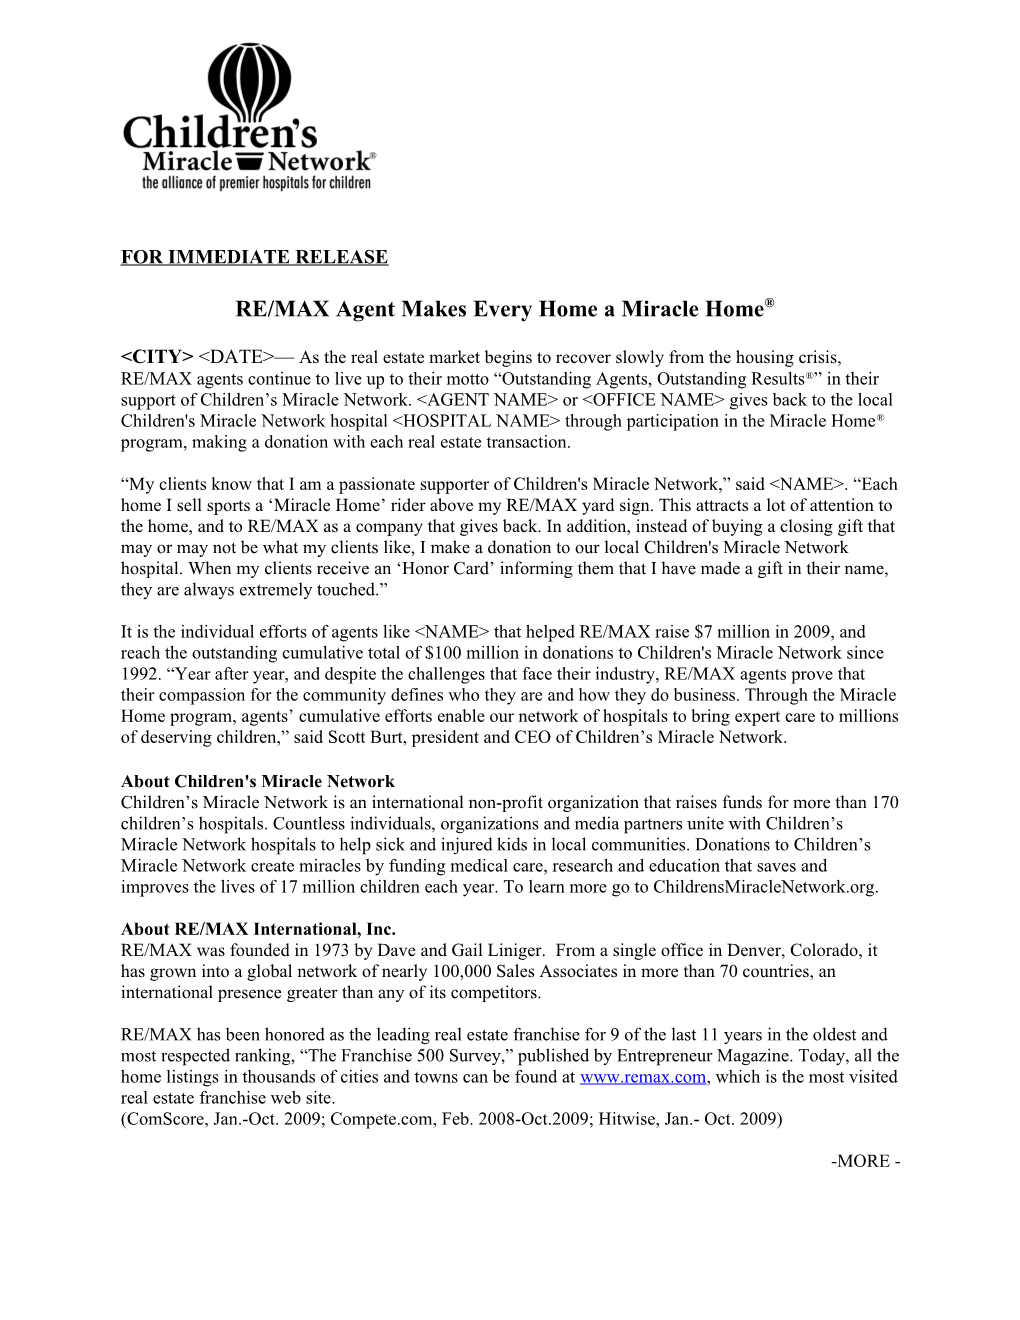 CMN Press Release Template for Miracle Home Program Participants